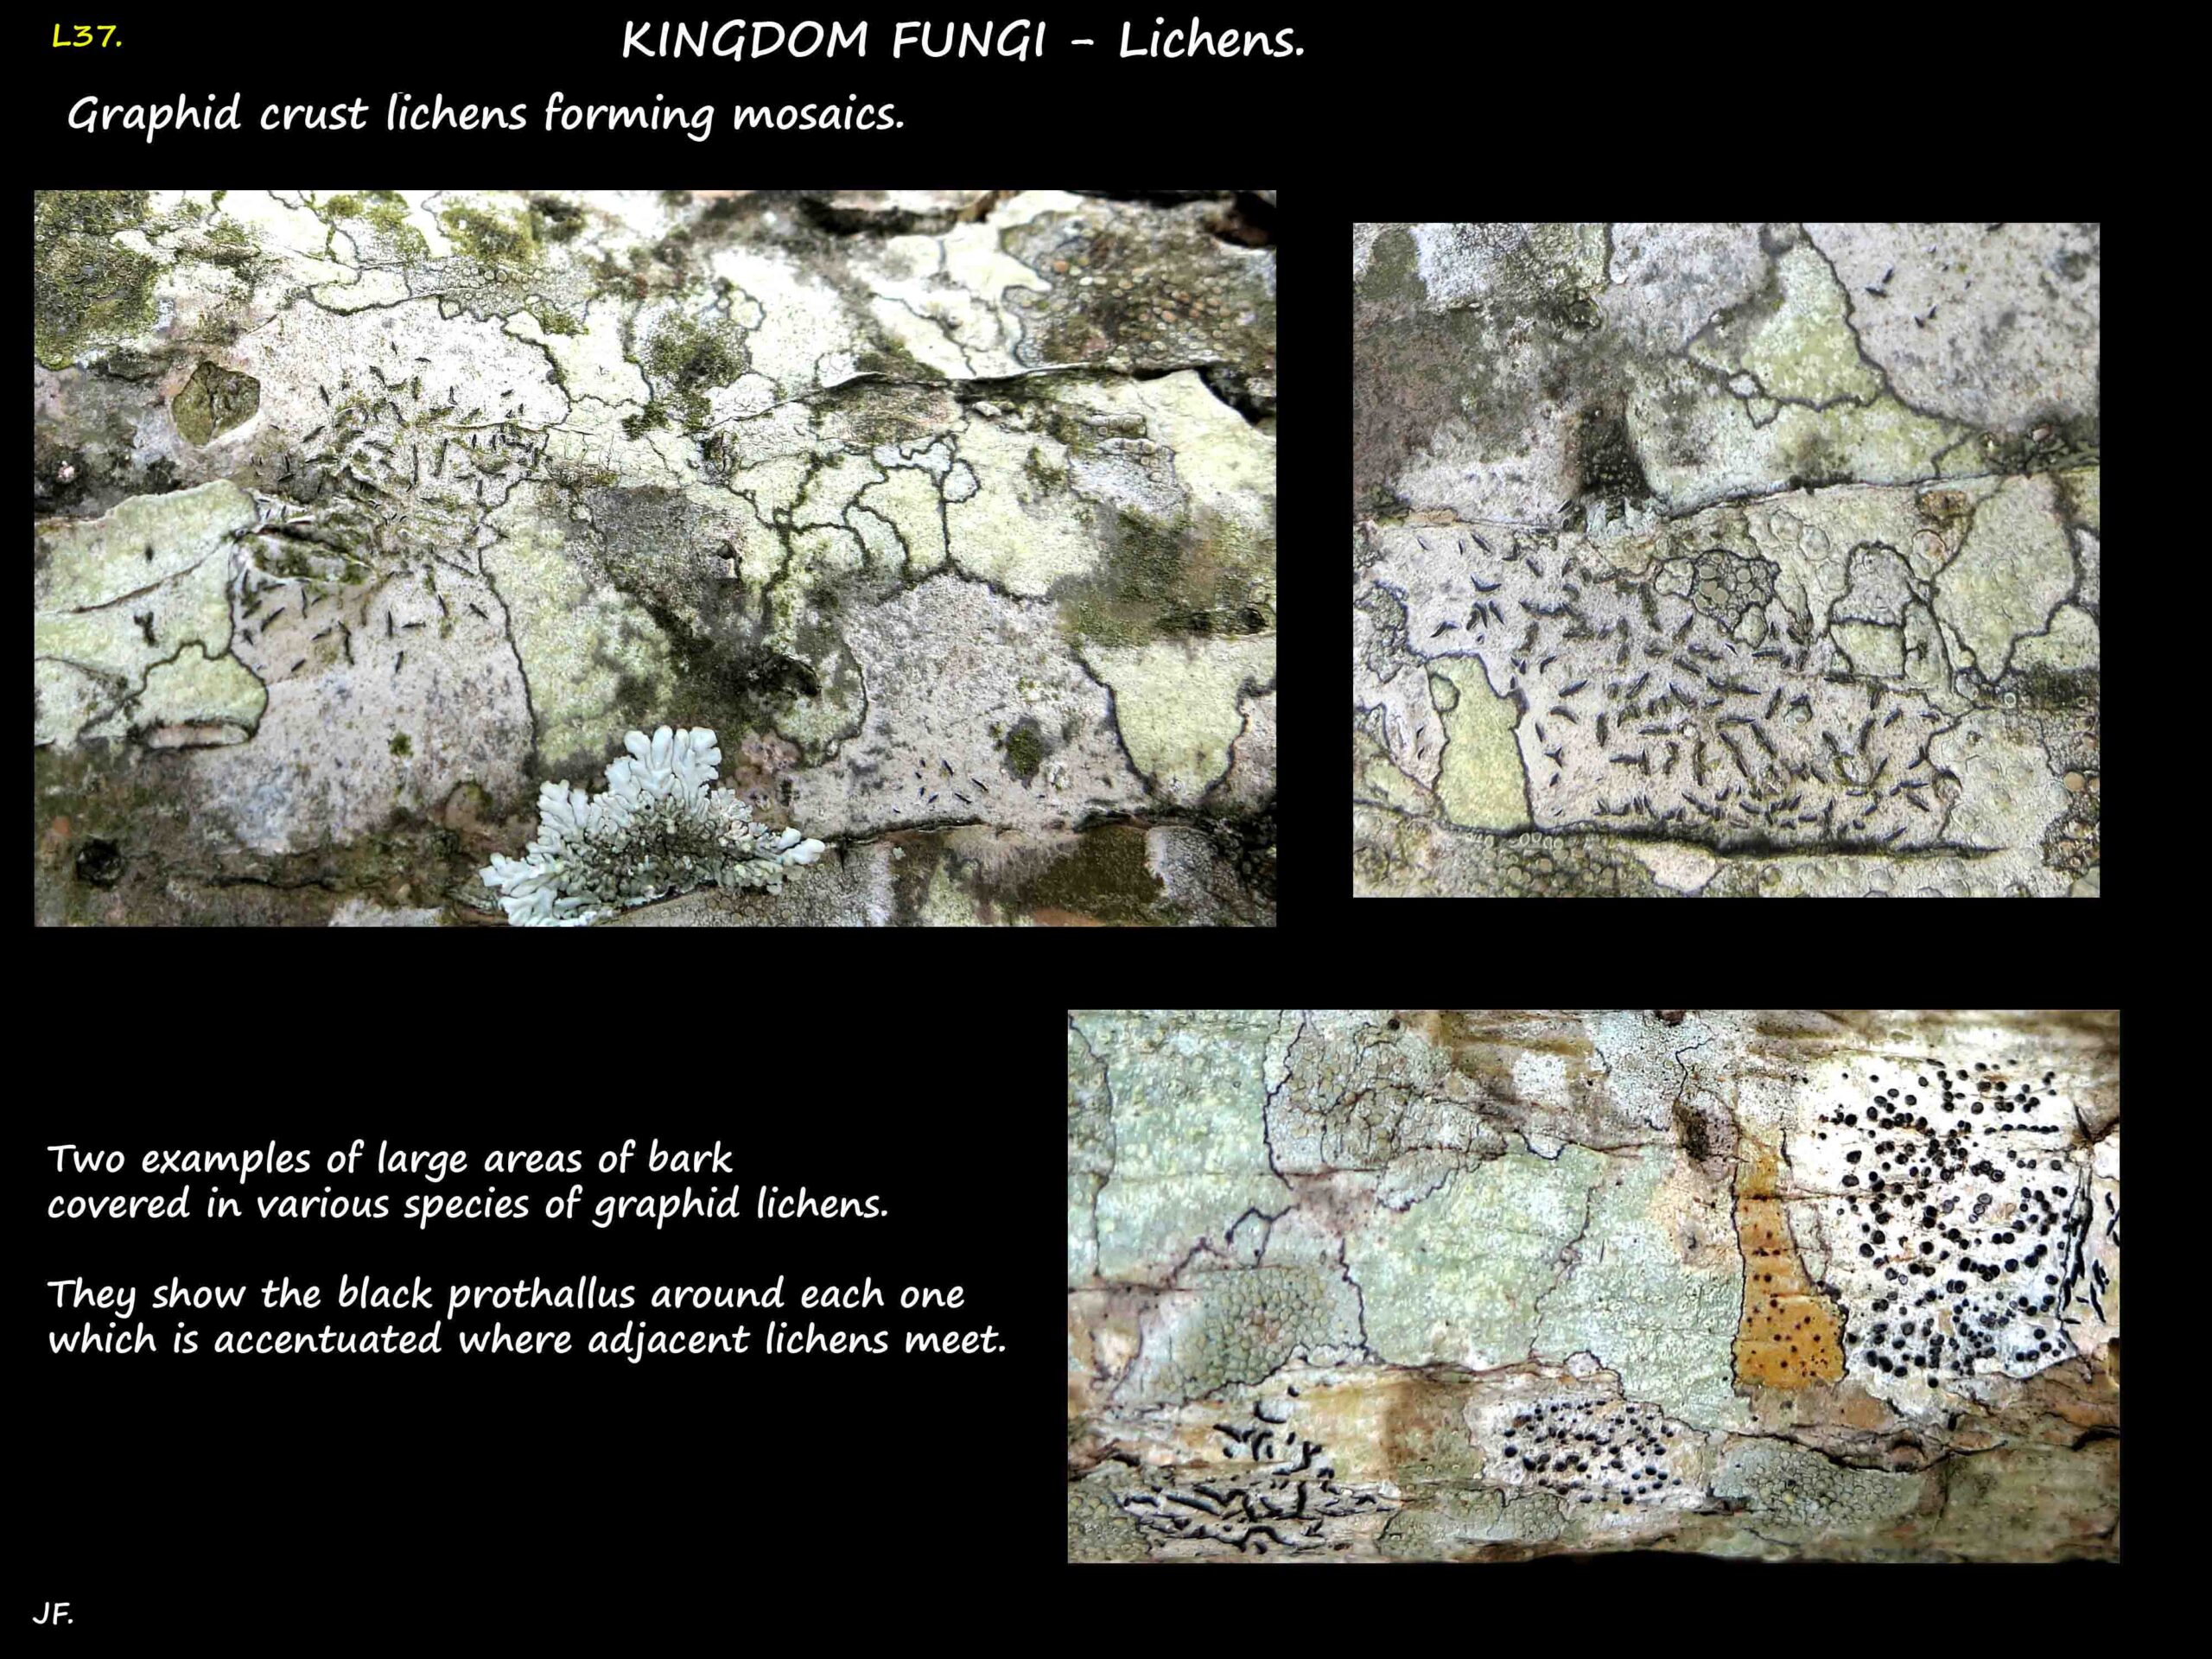 1 Mosaics in Graphid lichens